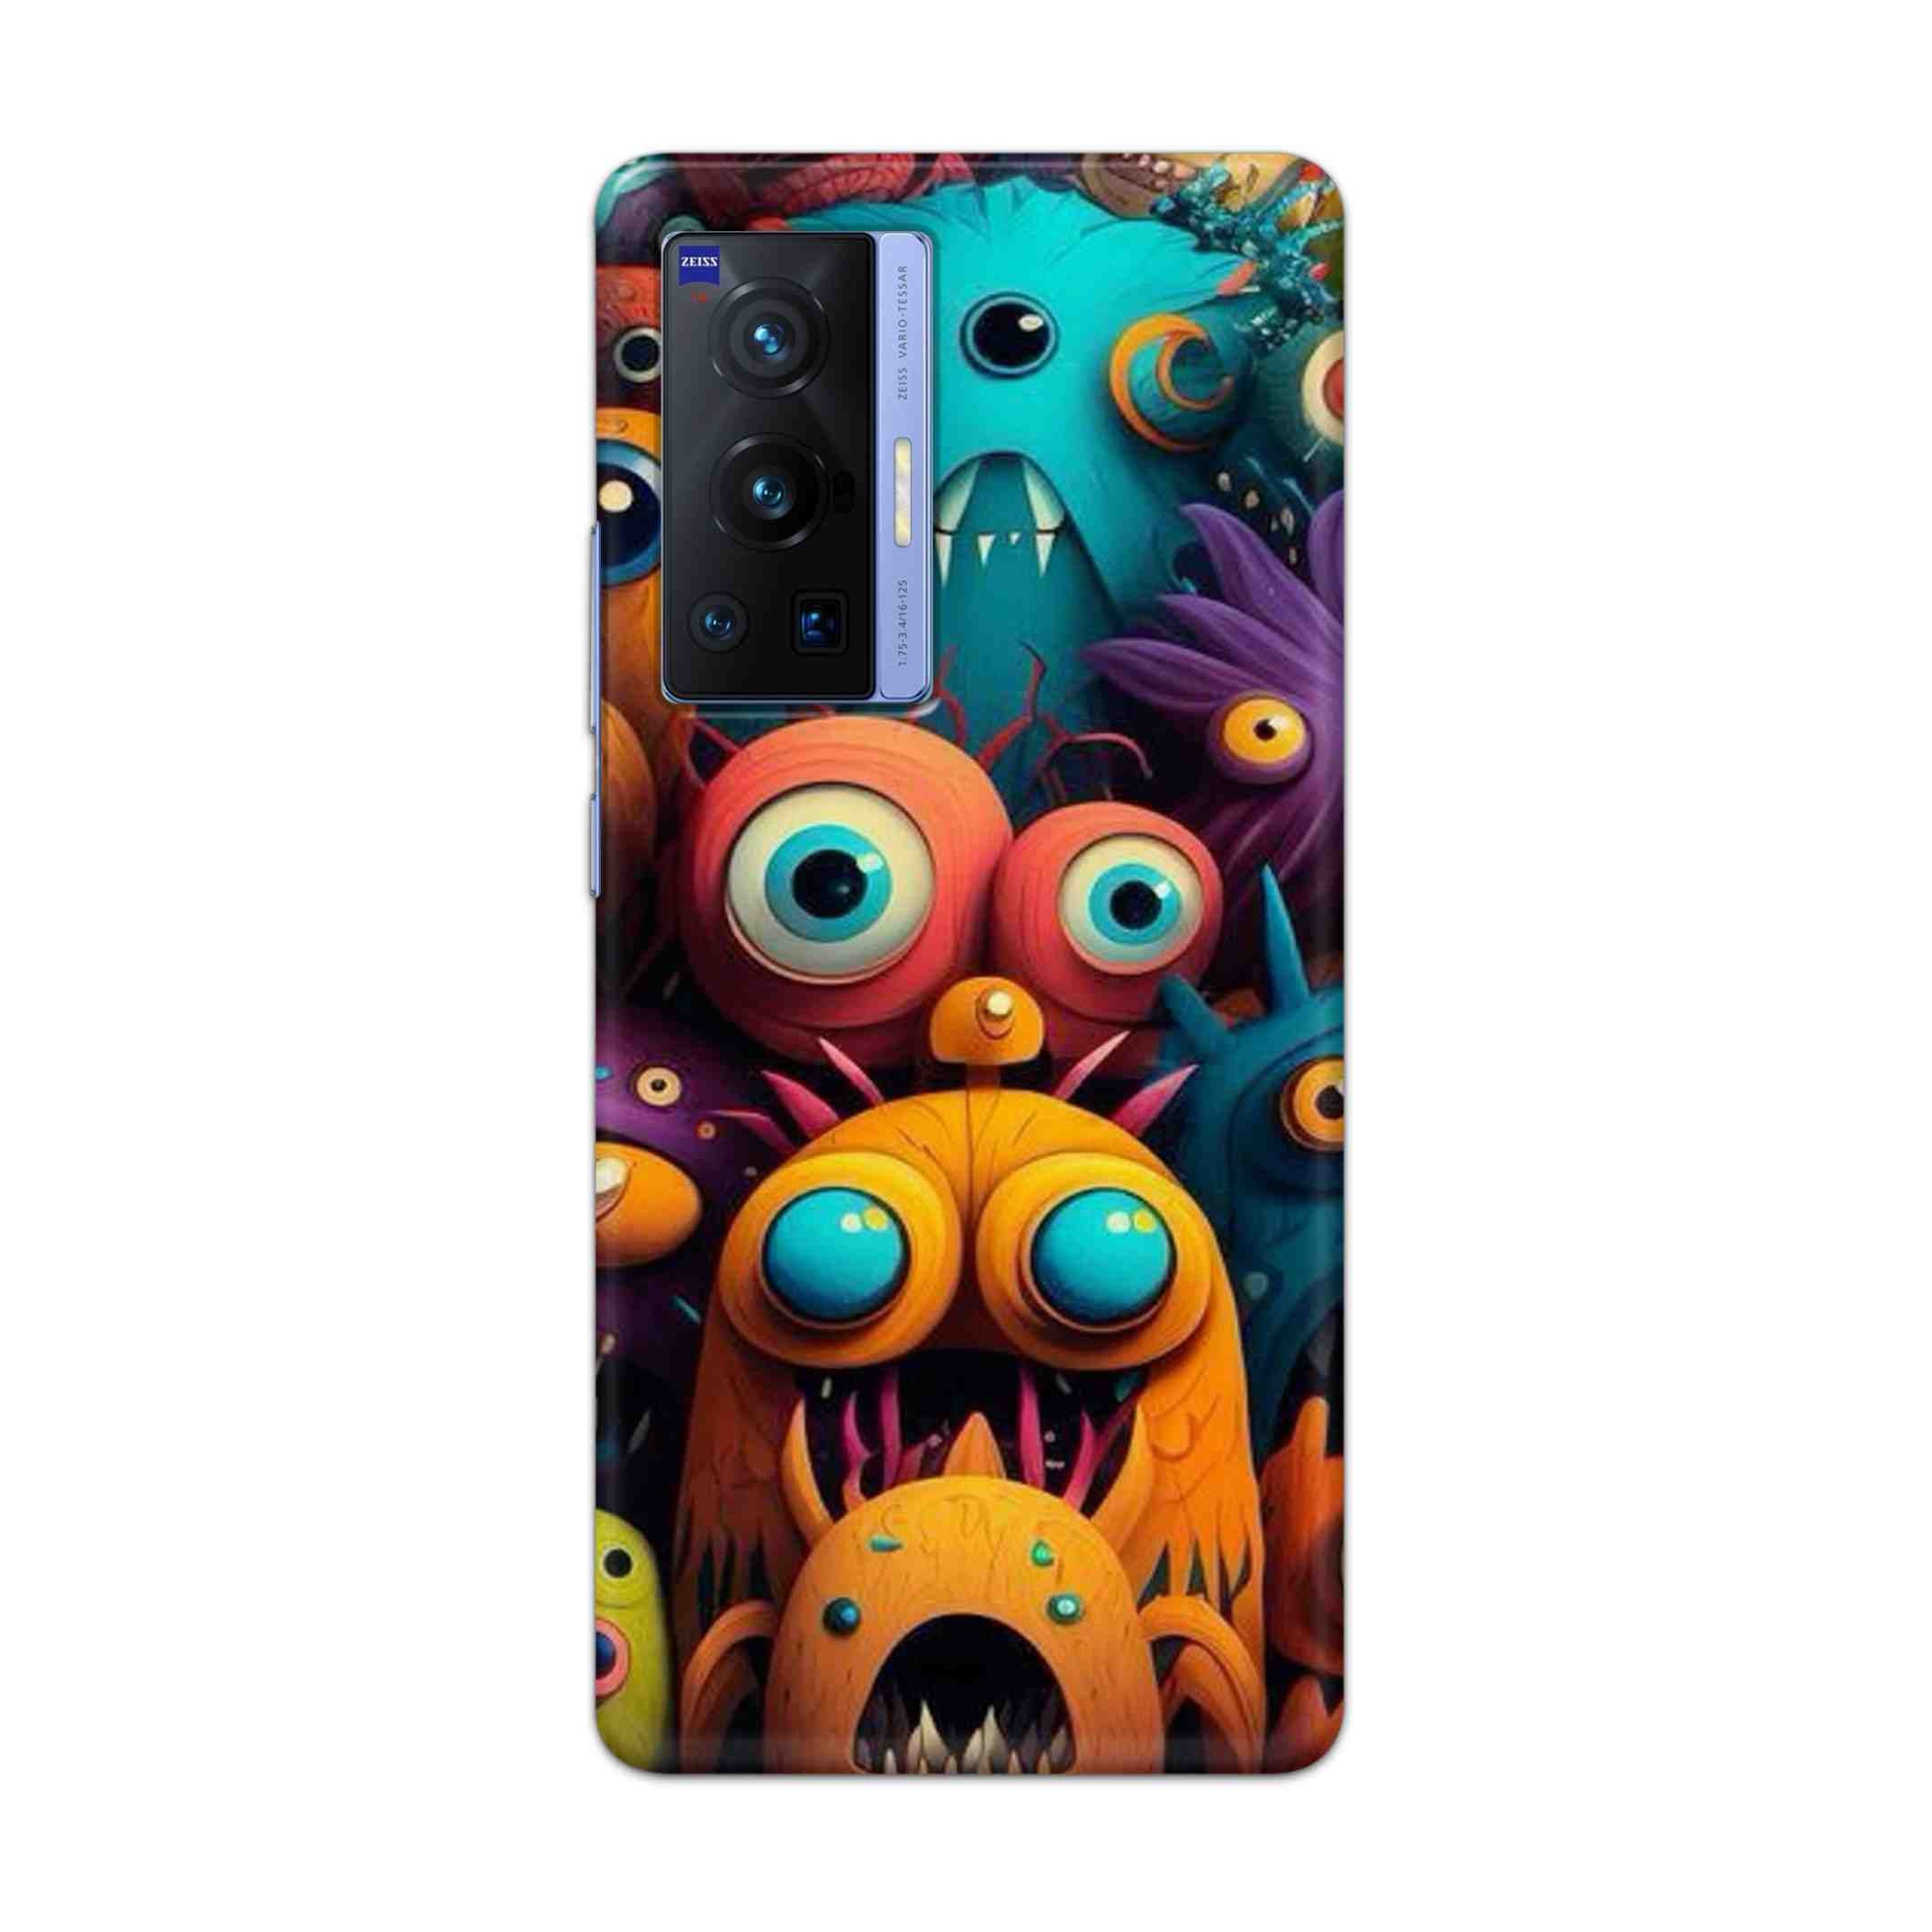 Buy Zombie Hard Back Mobile Phone Case Cover For Vivo X70 Pro Online